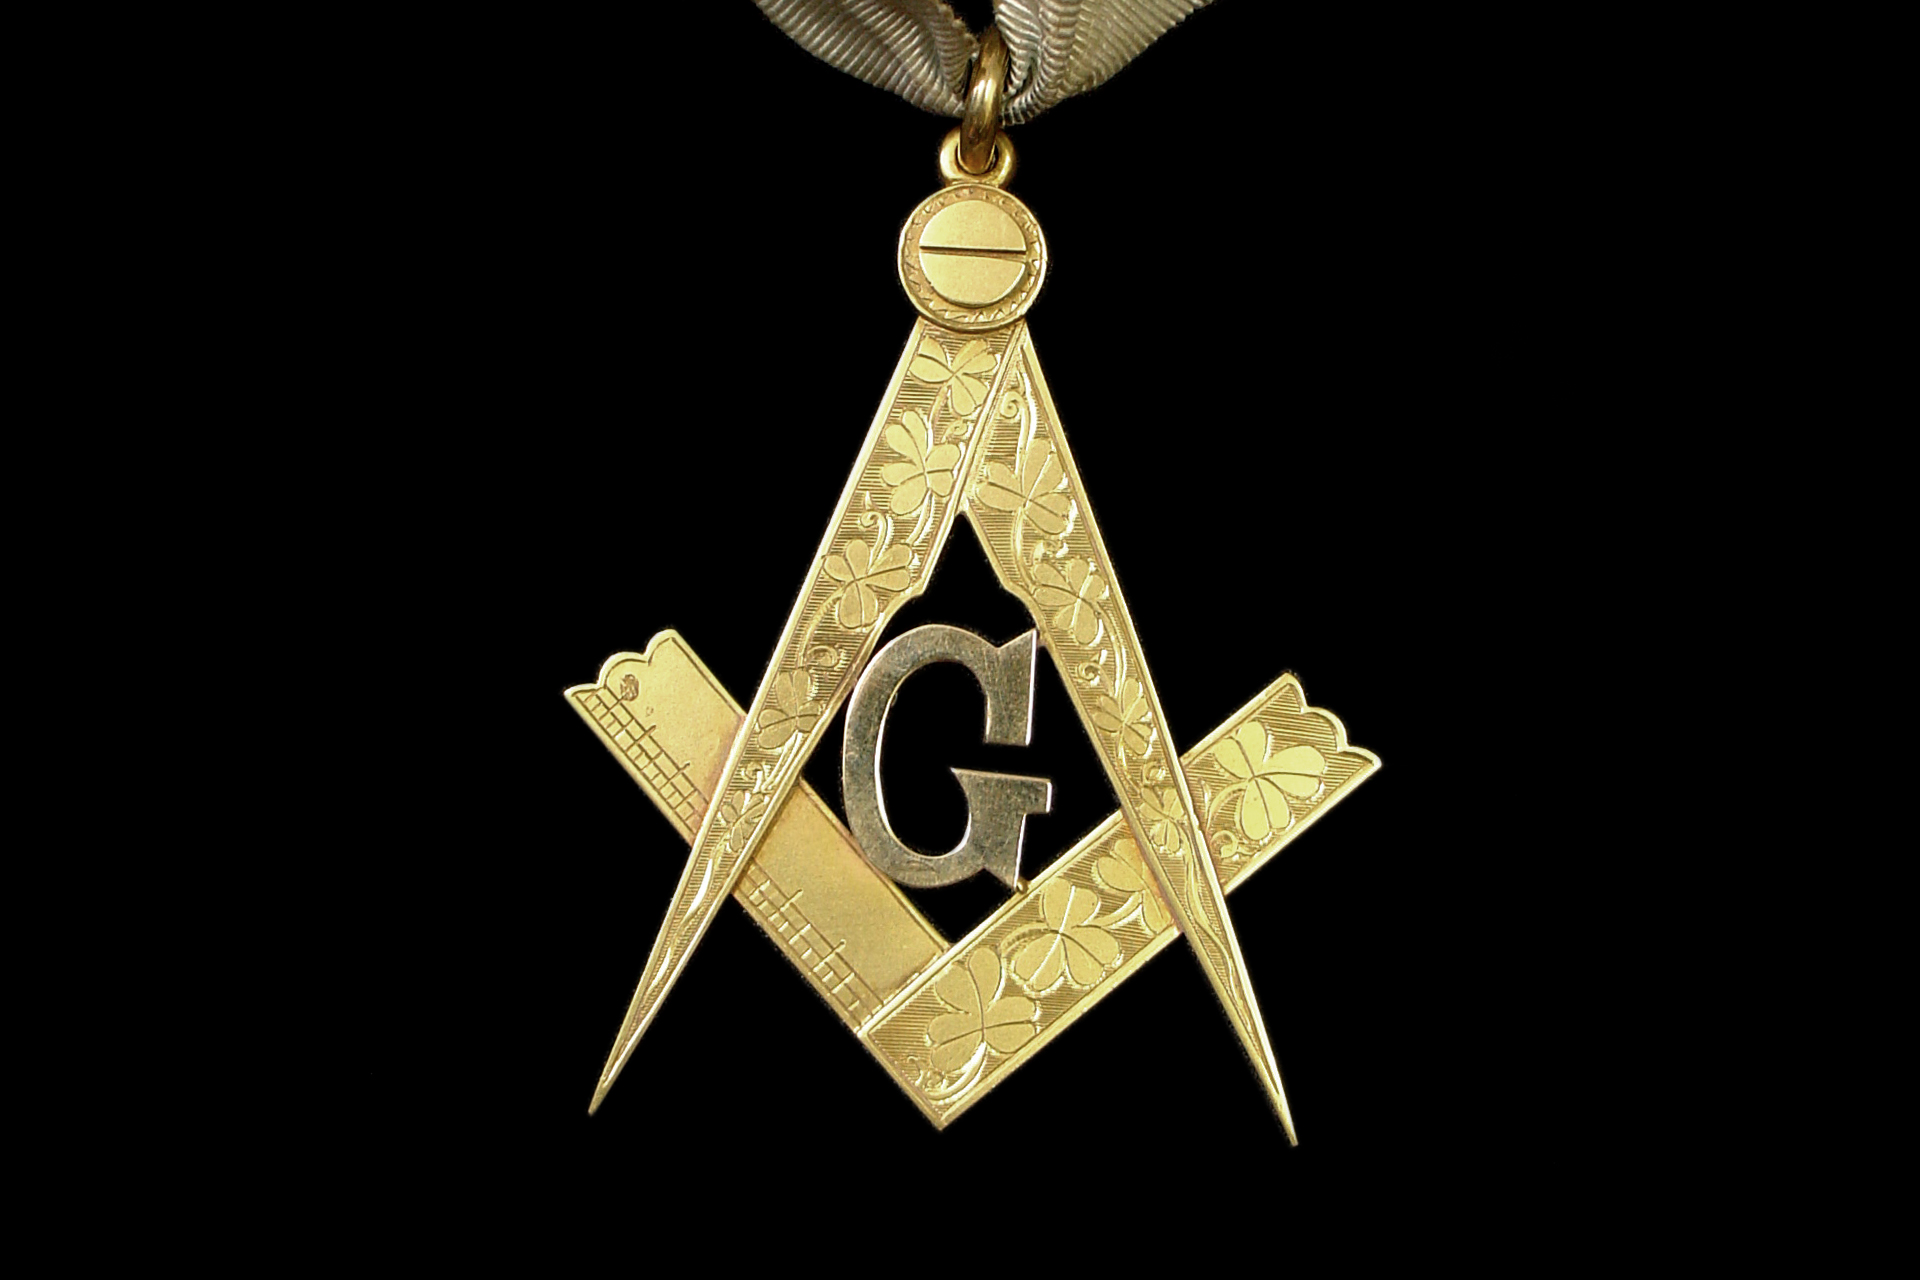 What does the G stand for on Masonic symbol?